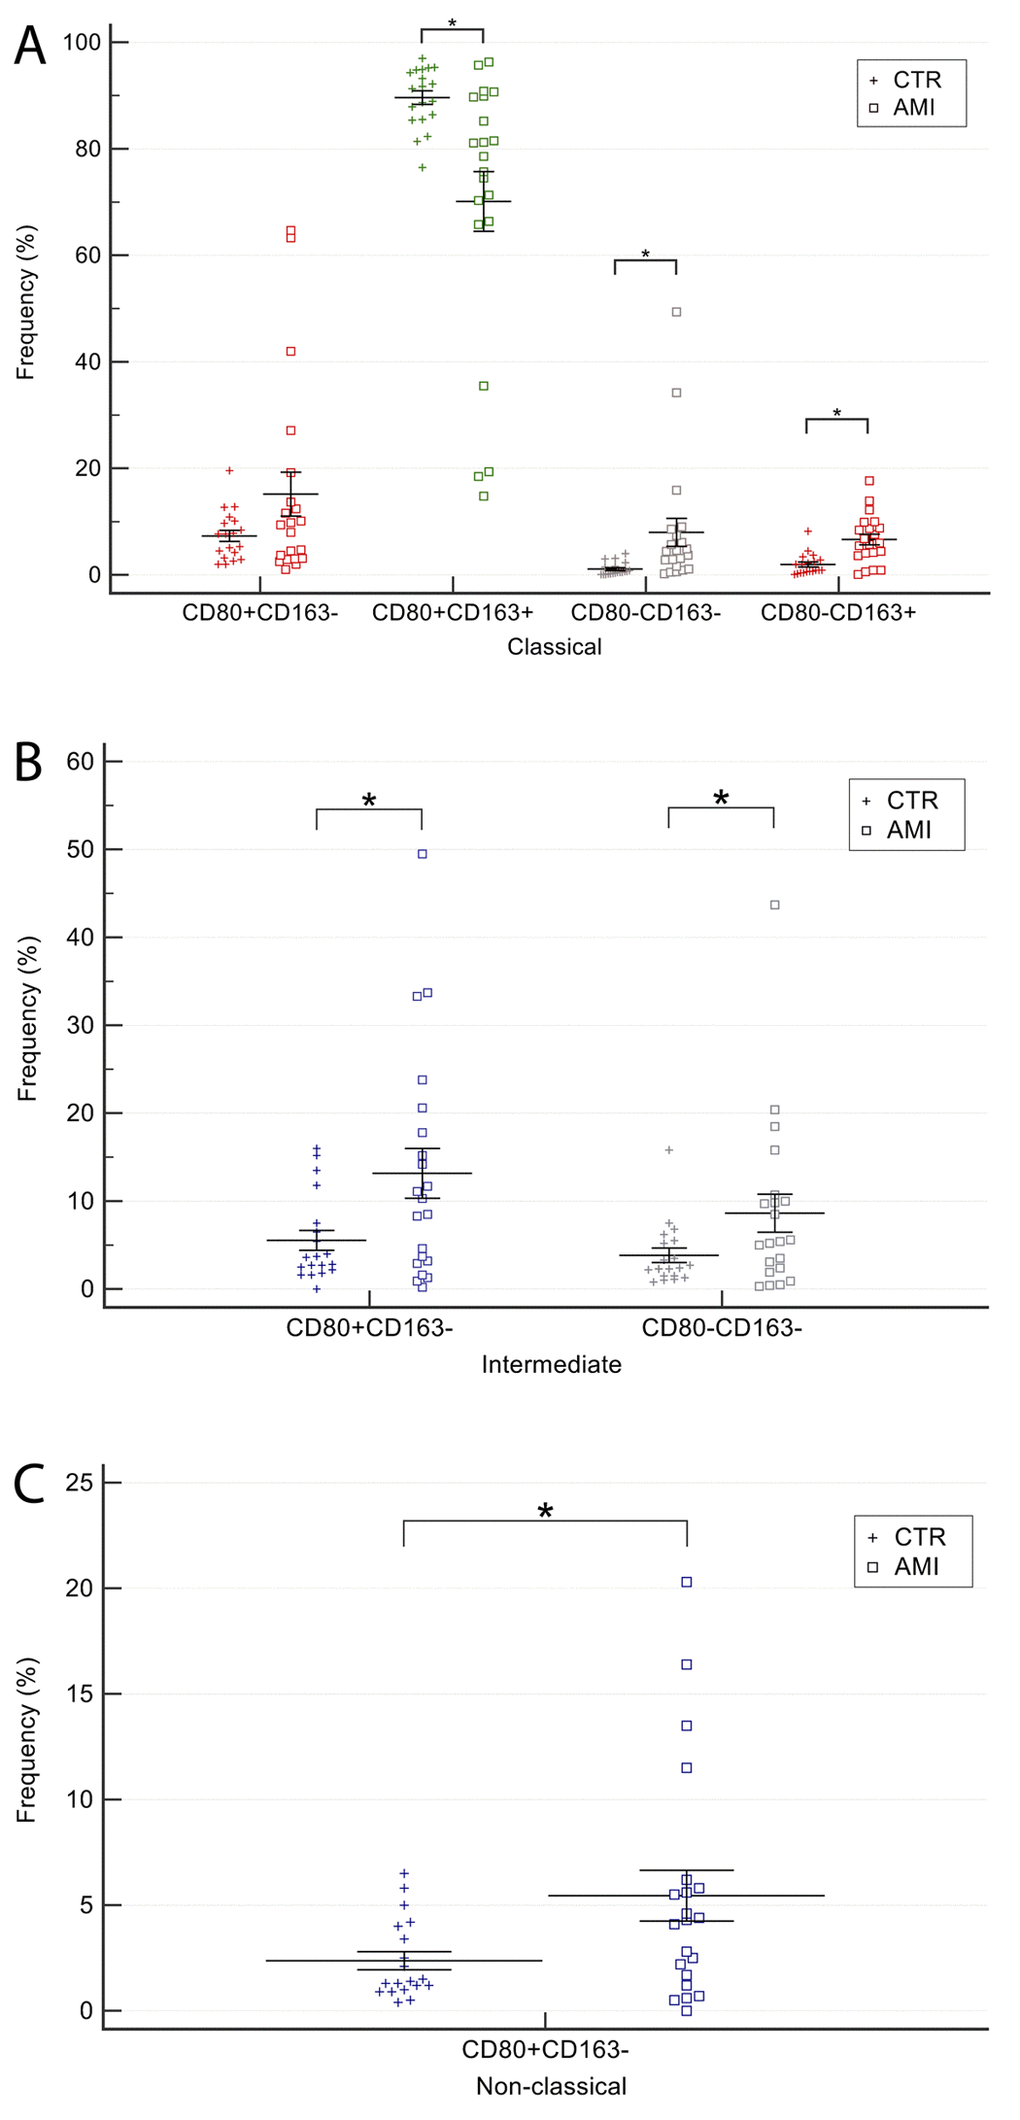 Comparison of CD80/CD163 monocytes subsets among classical, intermediate and non-classical monocytes in AMI patients and older CTR subjects. (A) Classical, (B) intermediate, (C) non-classical monocytes. AMI = 21 patients affected by AMI, older than 65 years. Old = 19 healthy subjects older than 65 years. Data are expressed as mean±SEM. *p